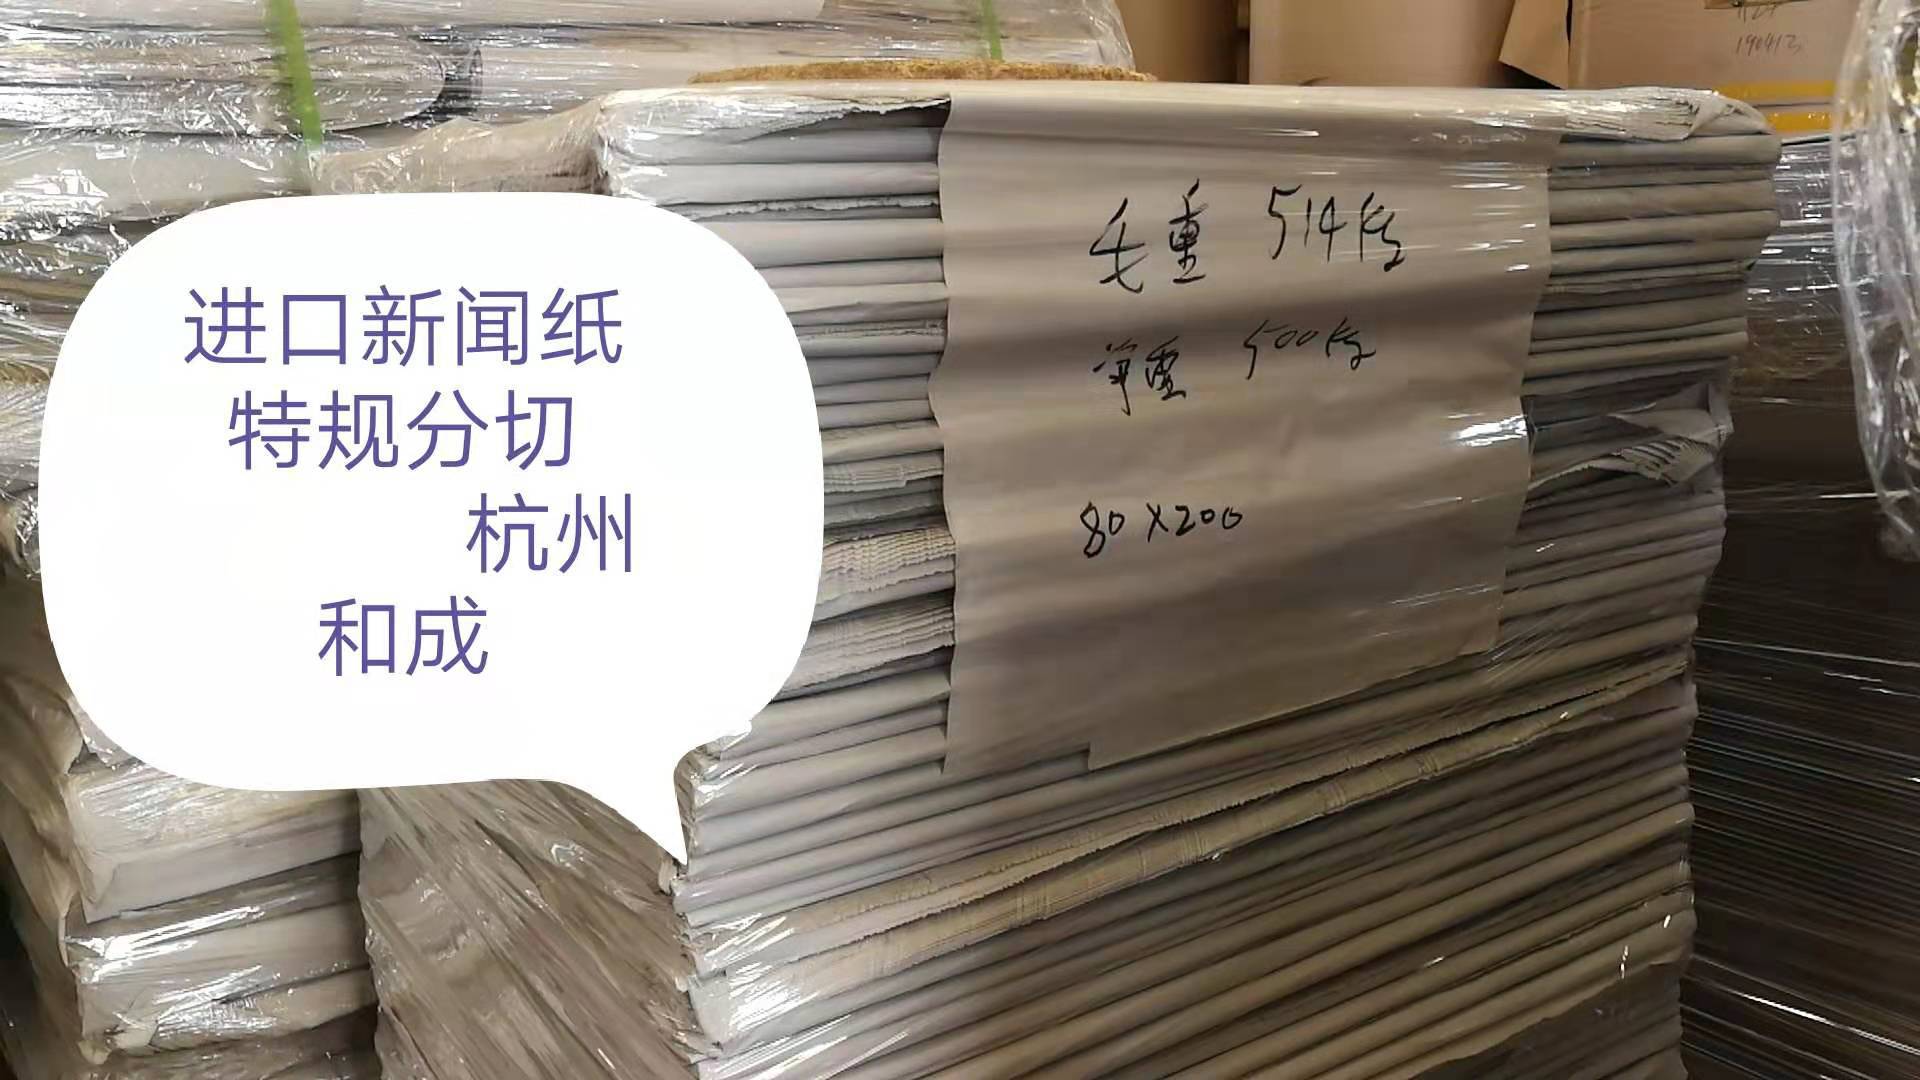 Hangzhou factory Cheap Of large number Sell 42 News packing paper Making paper